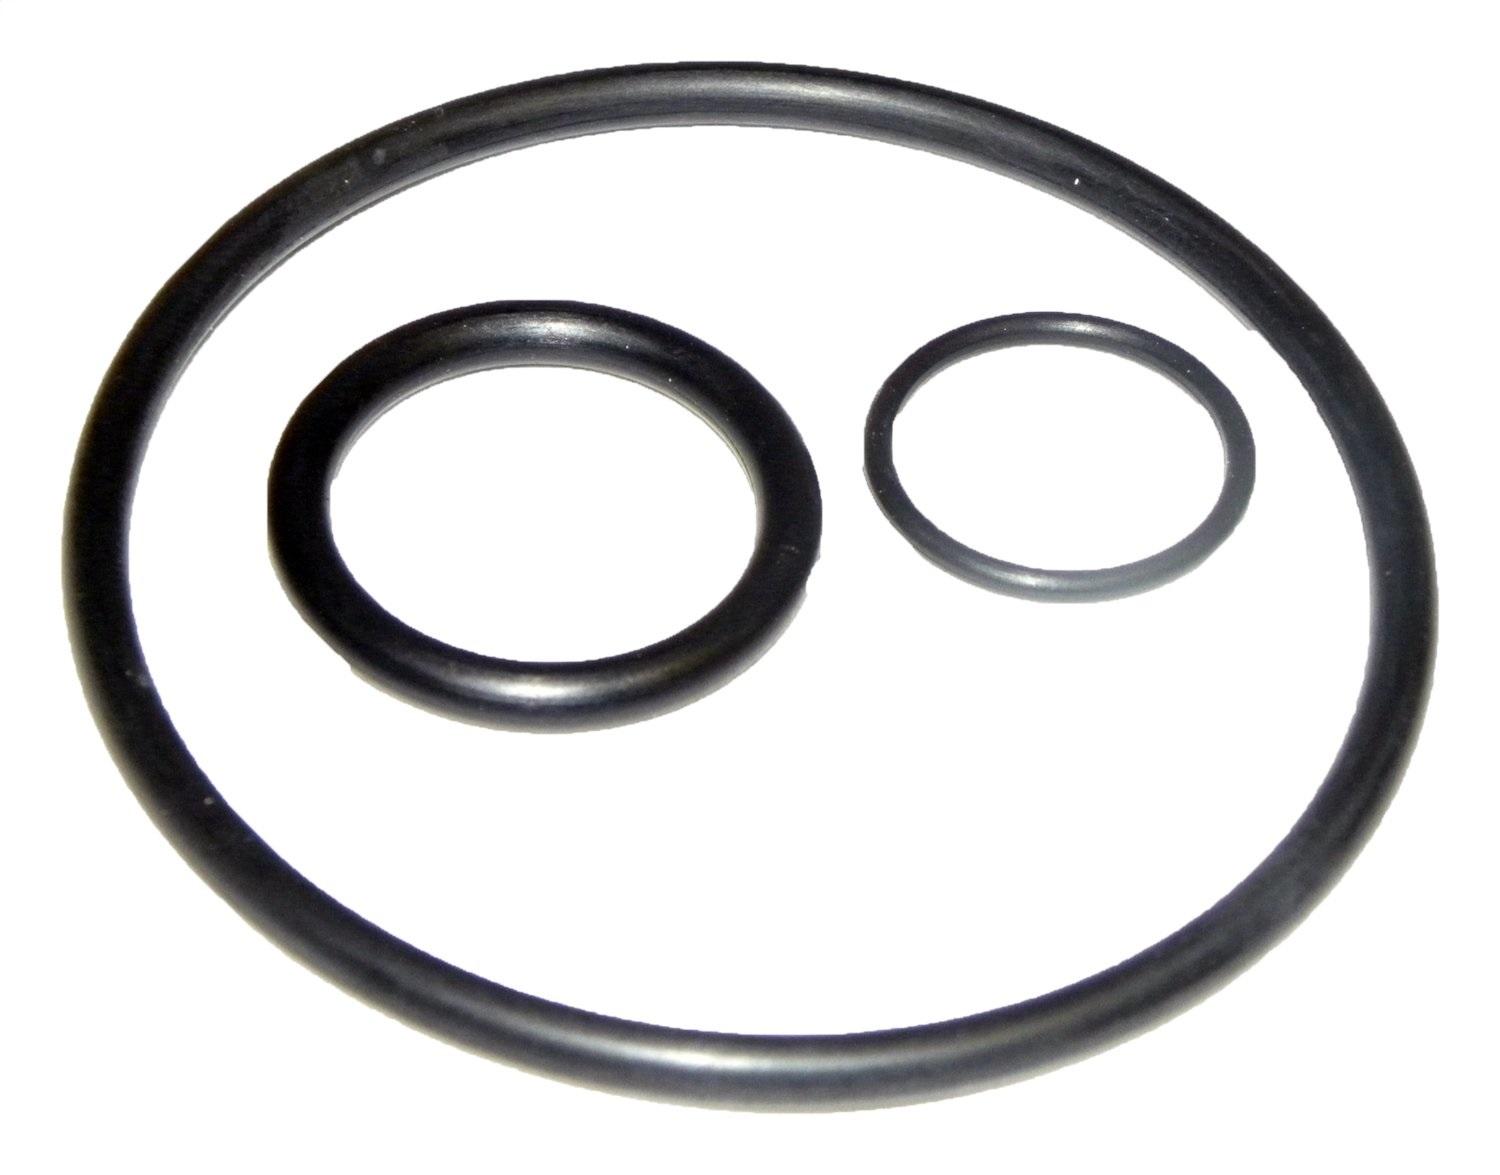 Crown Automotive Crown Automotive 4720363 Oil Filter Adapter Seal Kit